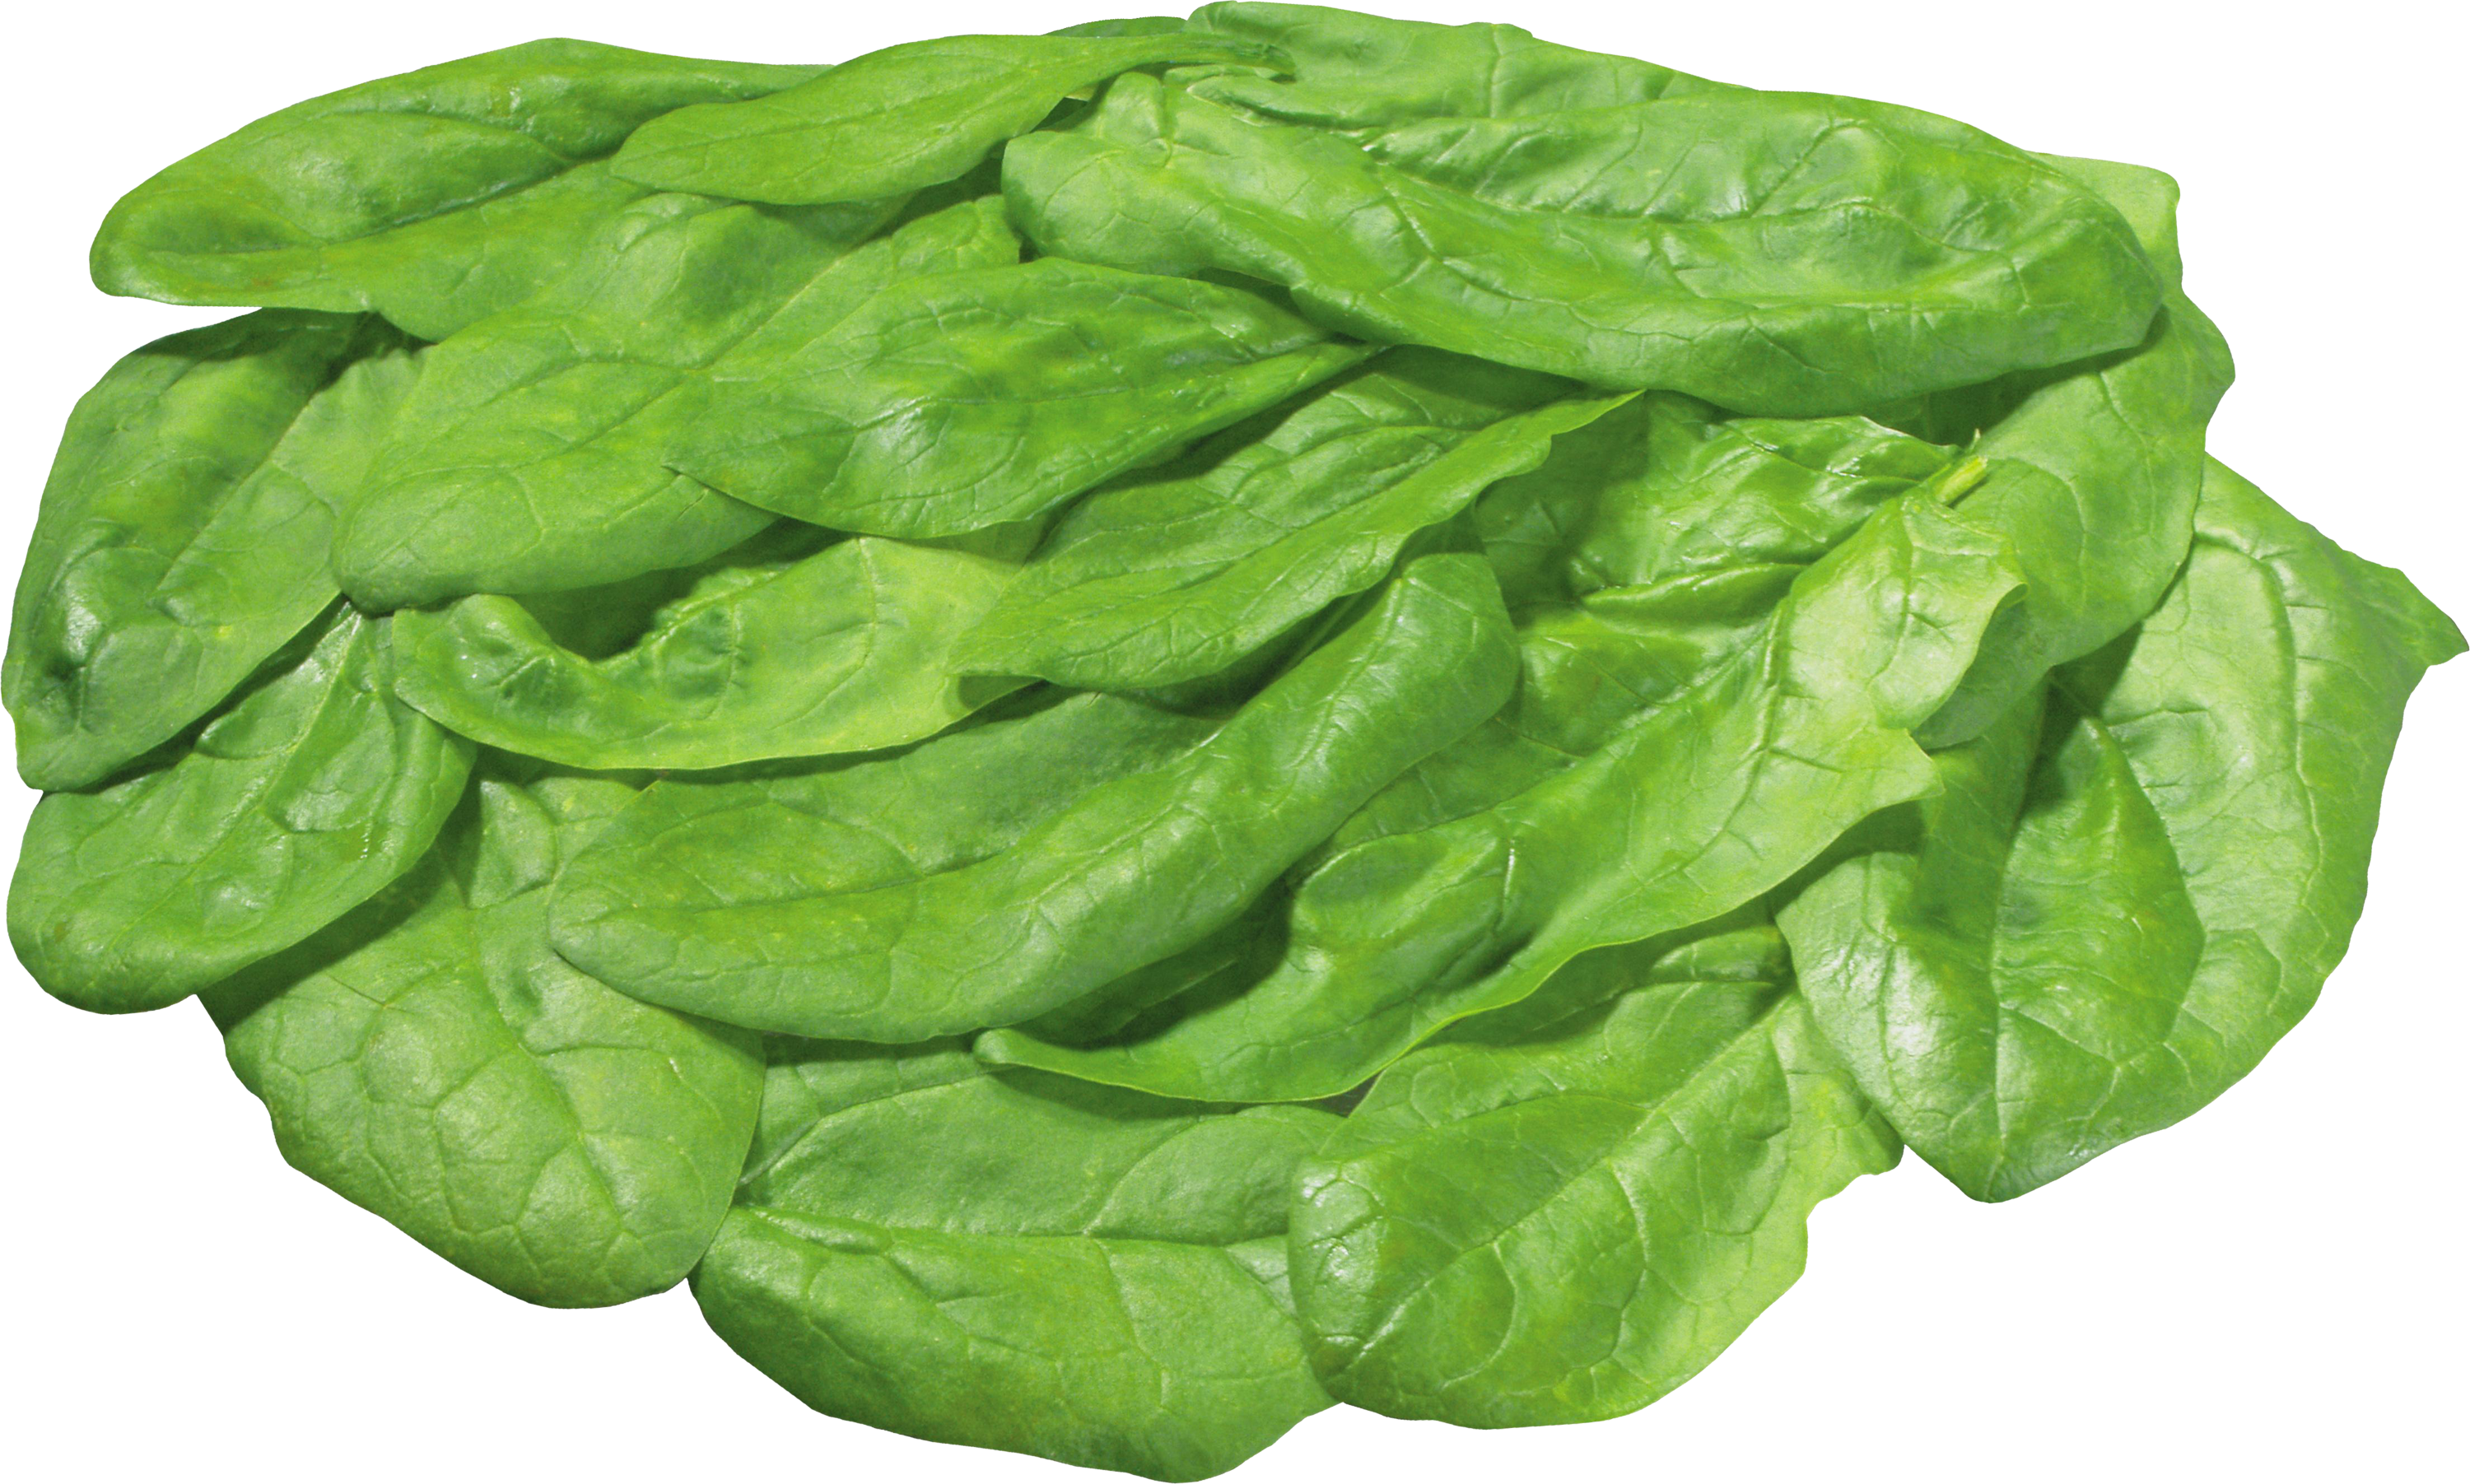 Leafy vegetable free on. Lettuce clipart spinach